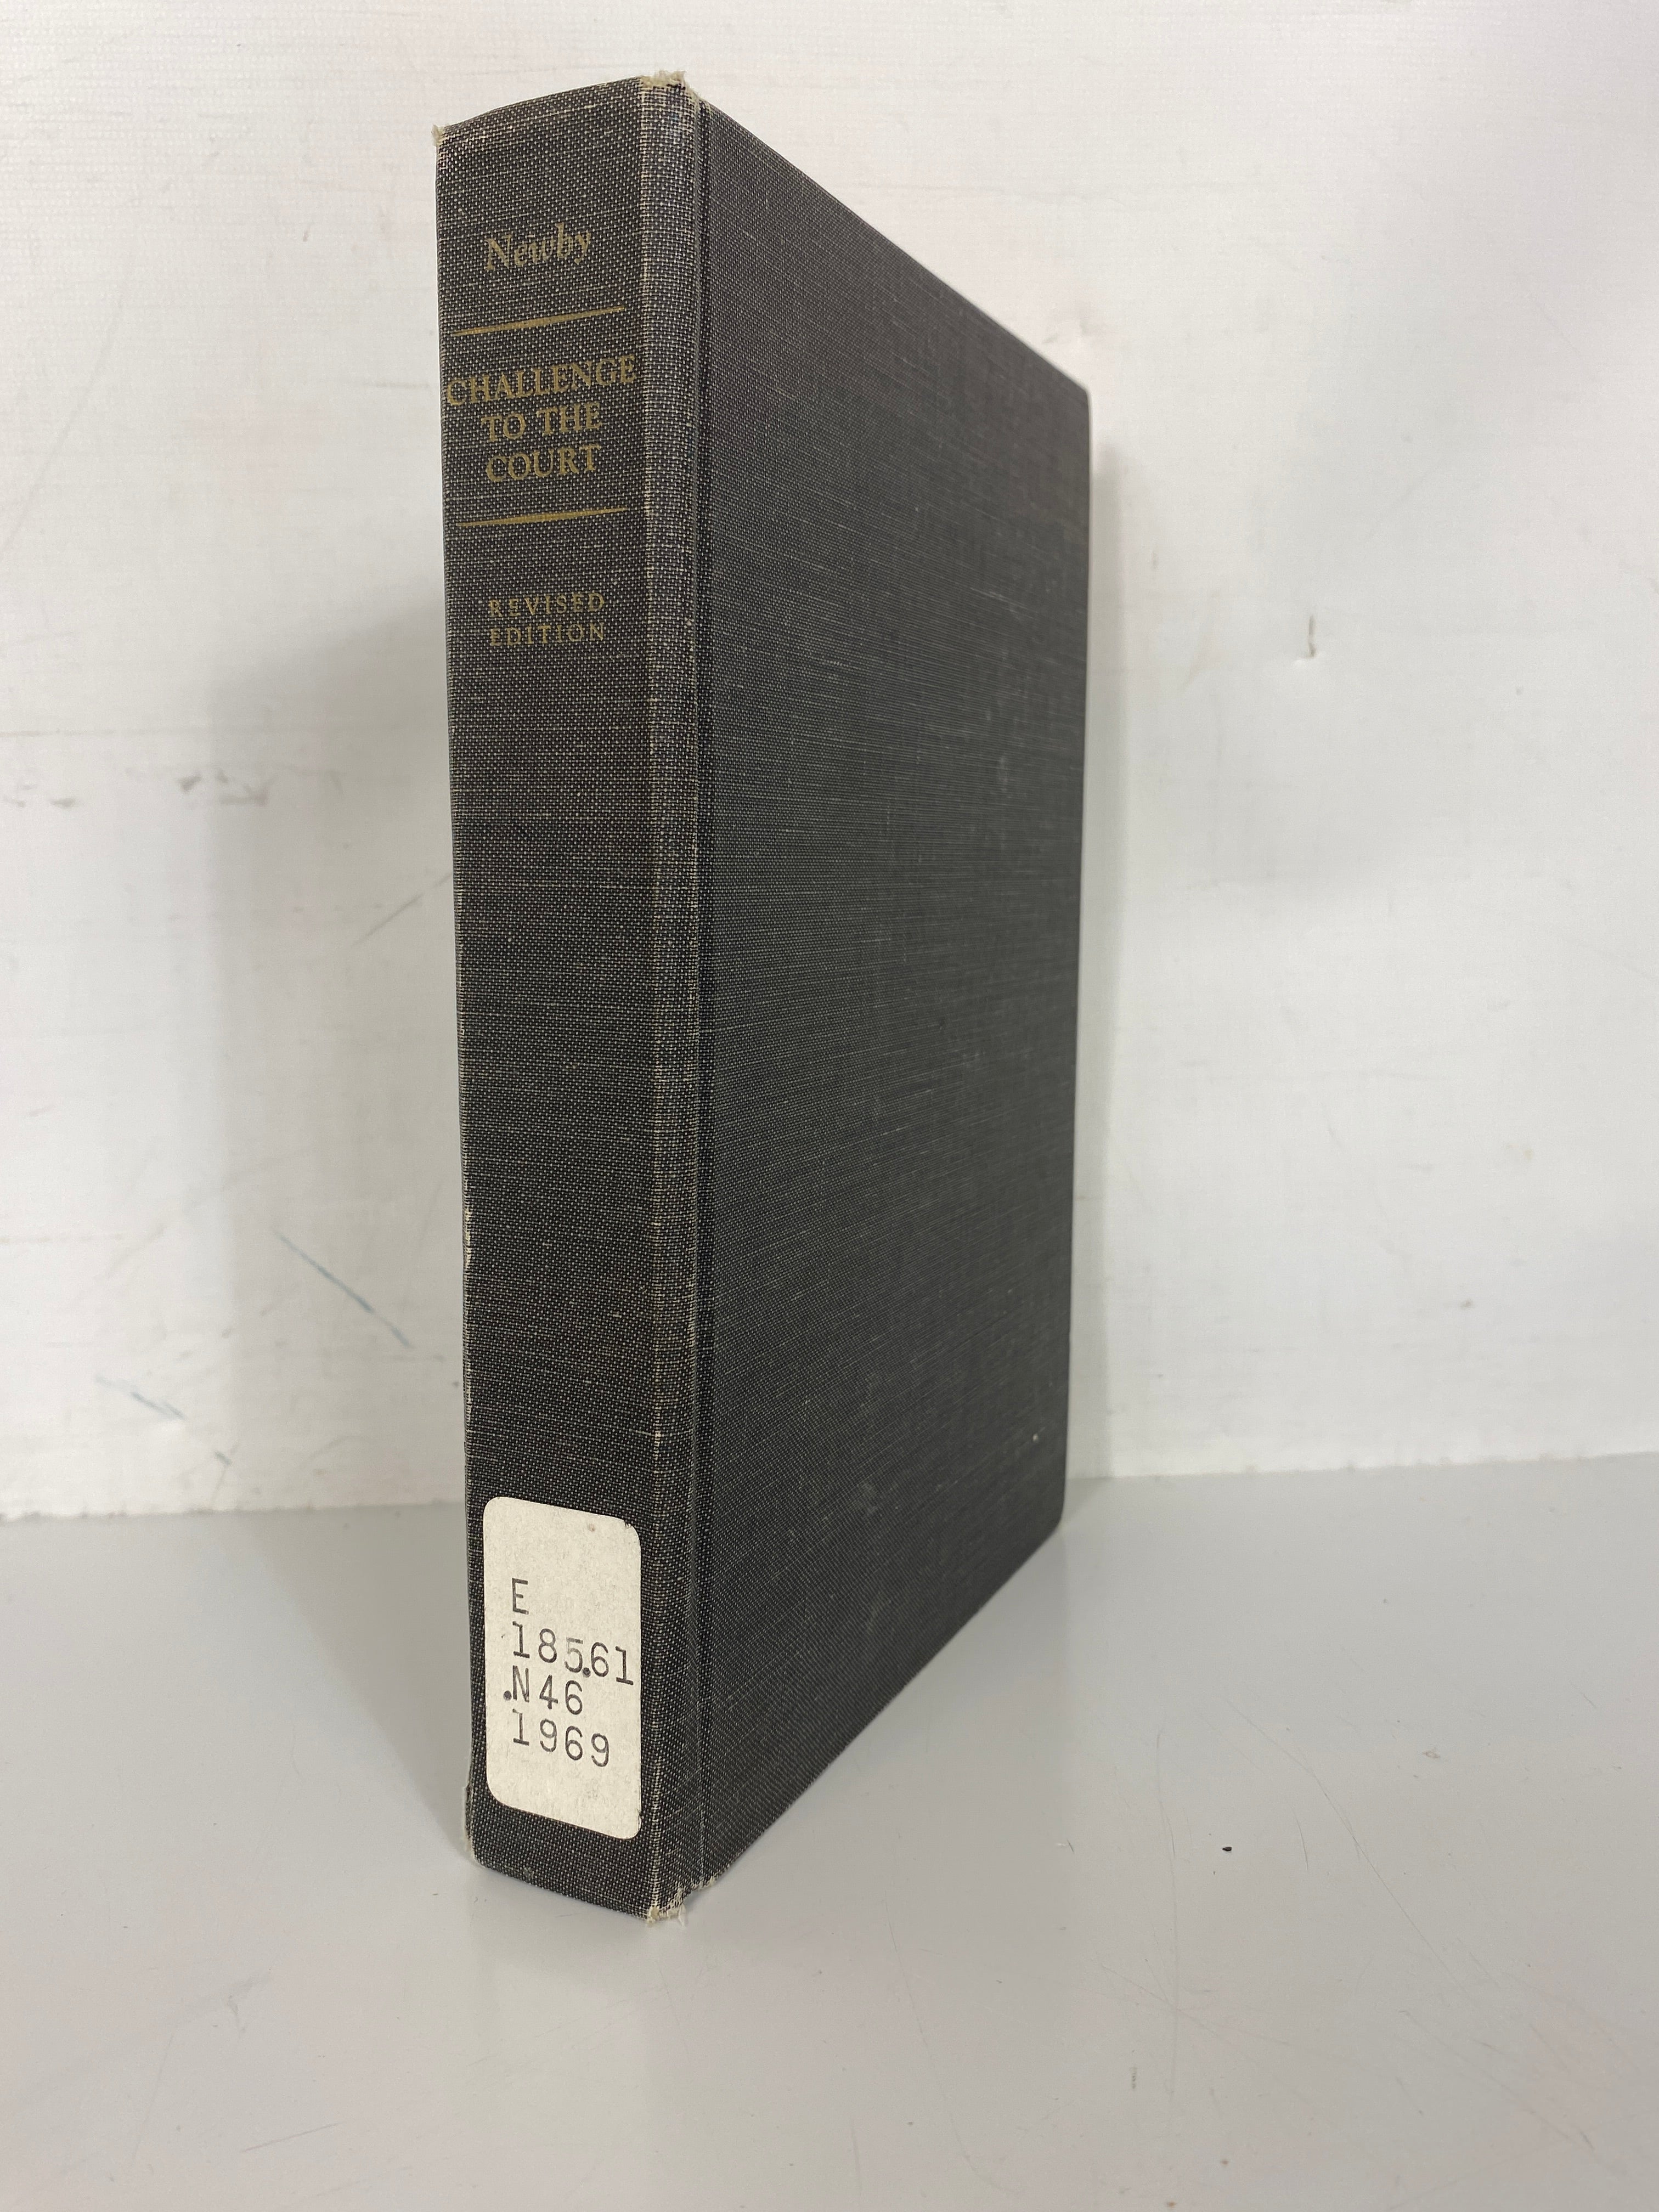 Challenge to the Court by I.A. Newby (1969)  HC